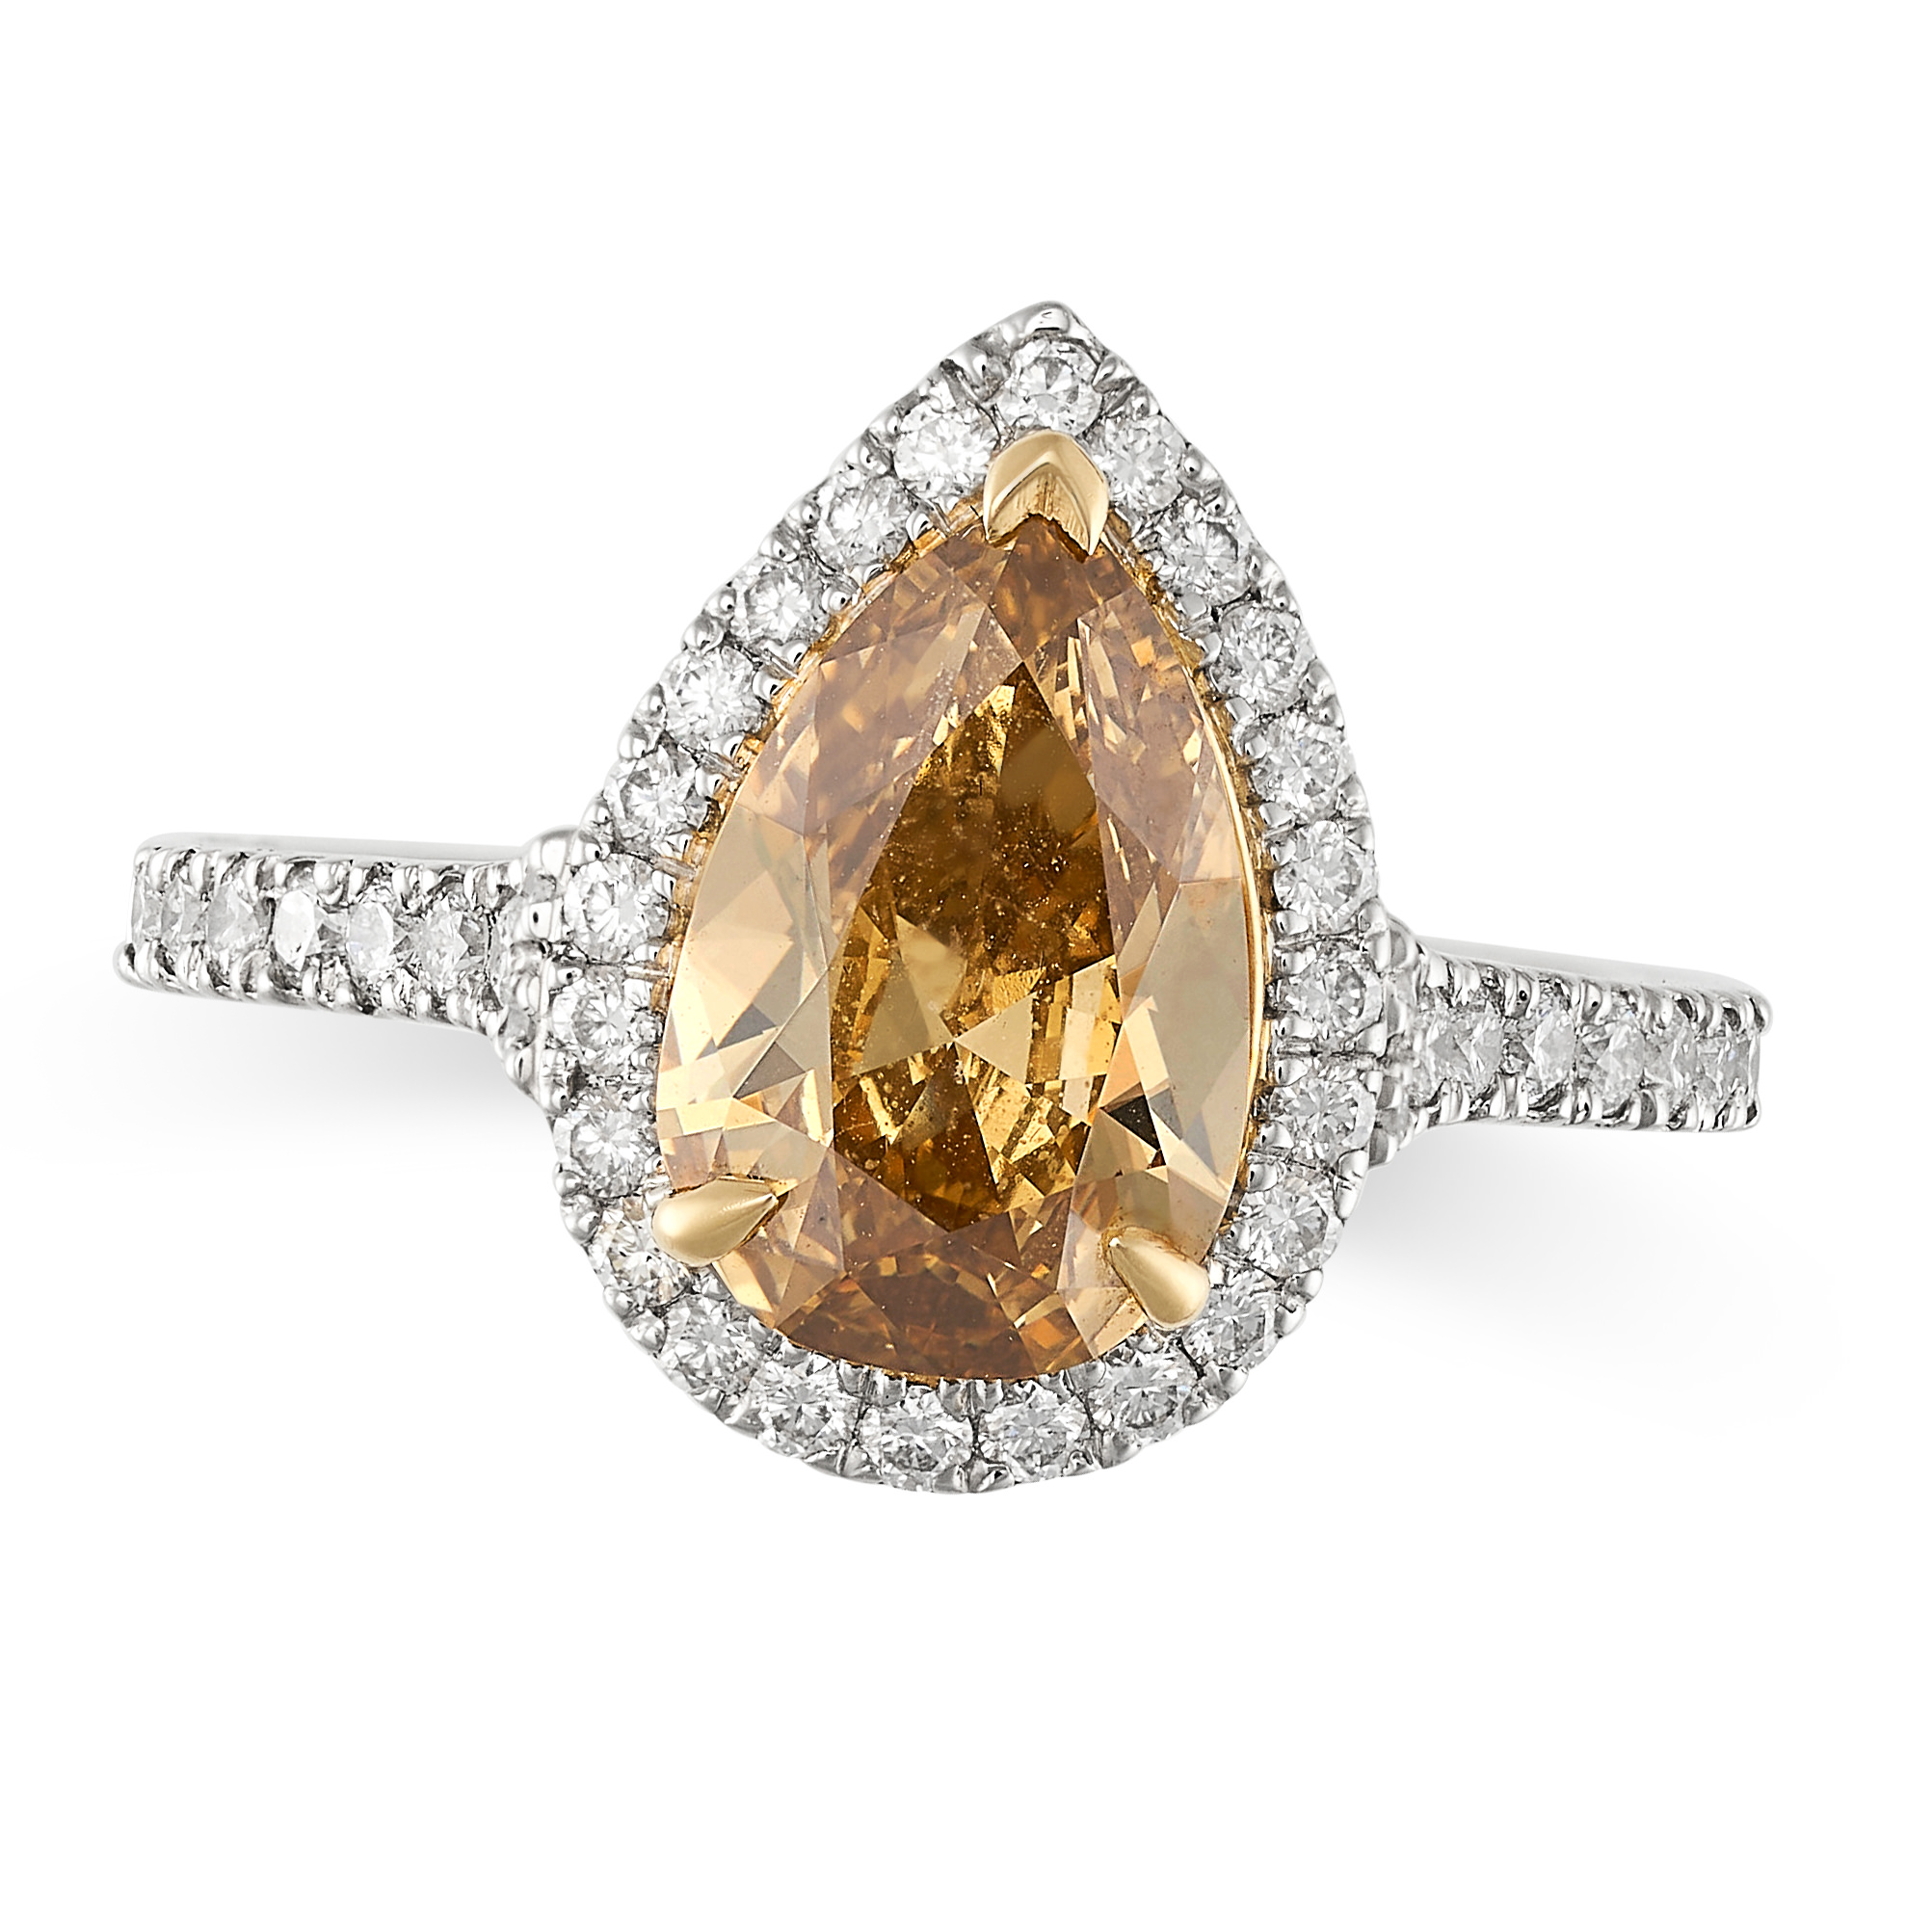 A BROWN DIAMOND RING in platinum and 18ct white gold, set with a brown pear cut diamond of 2.20 c...